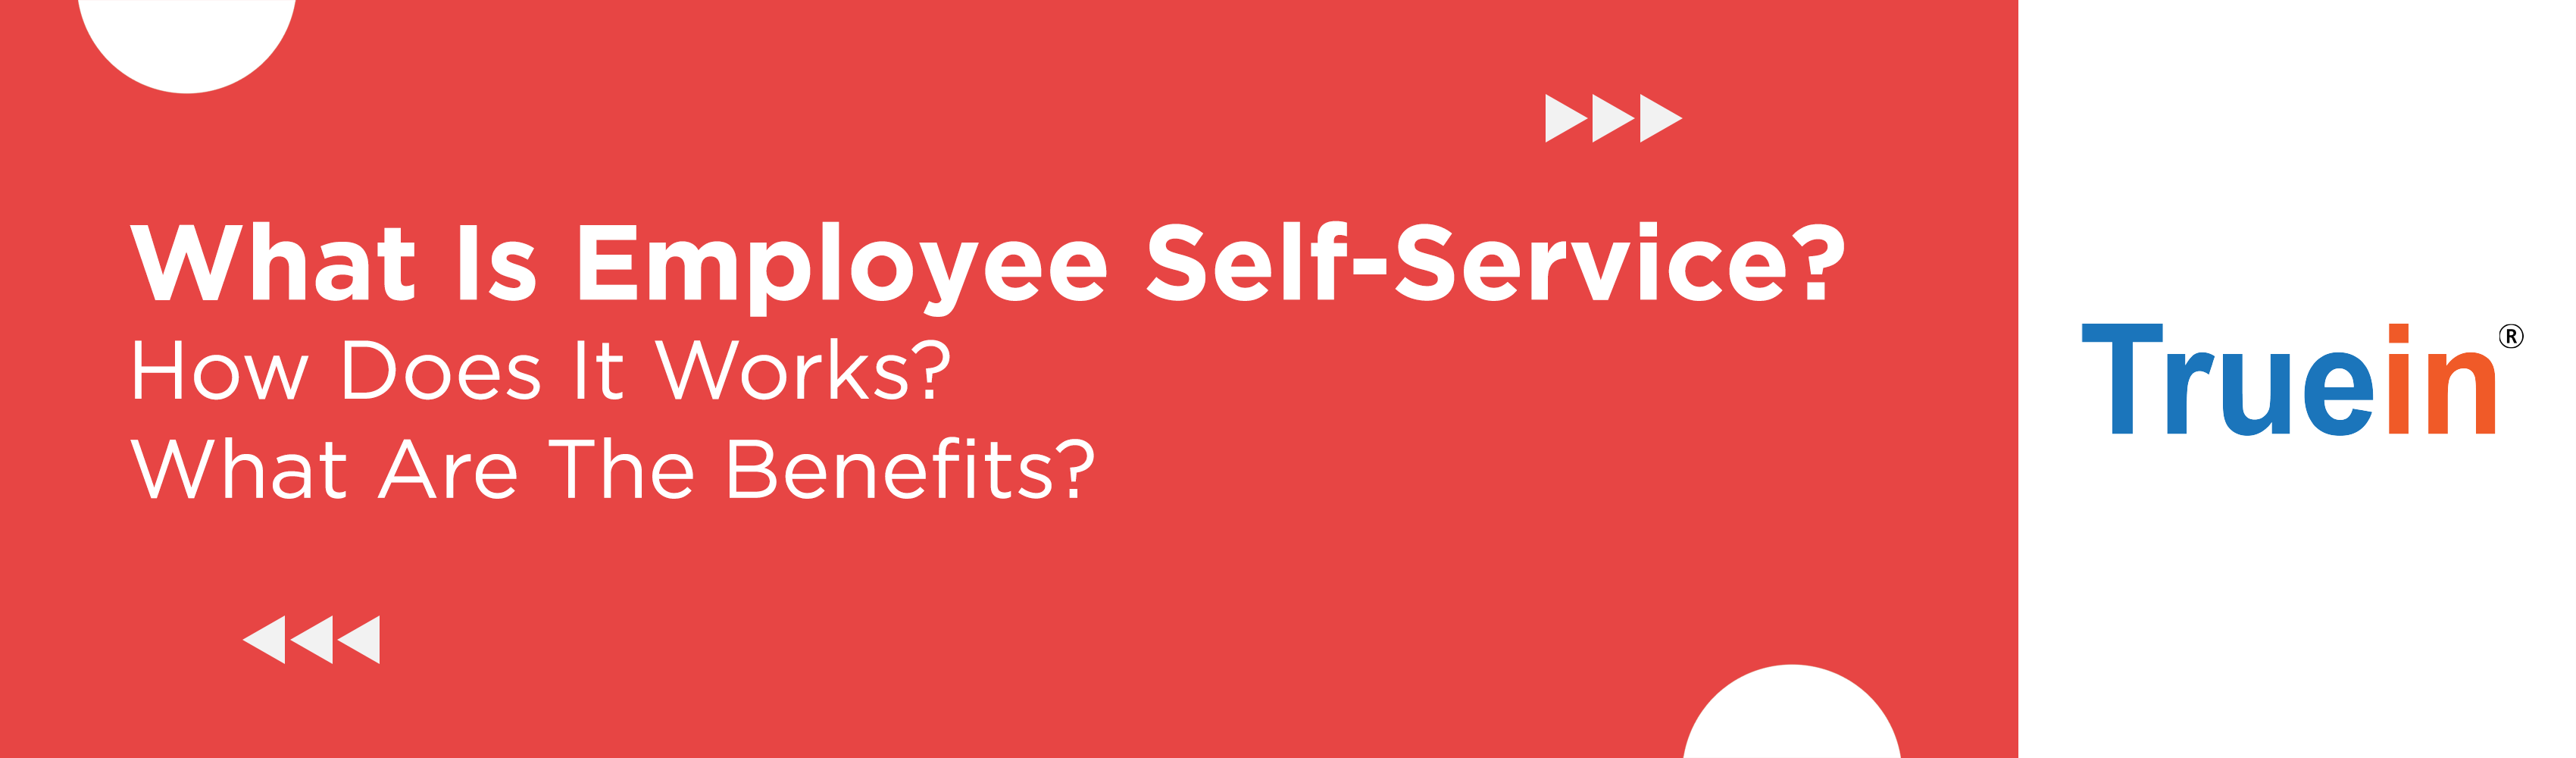 What Is Employee Self-Service, How It Works and What Are The Benefits?